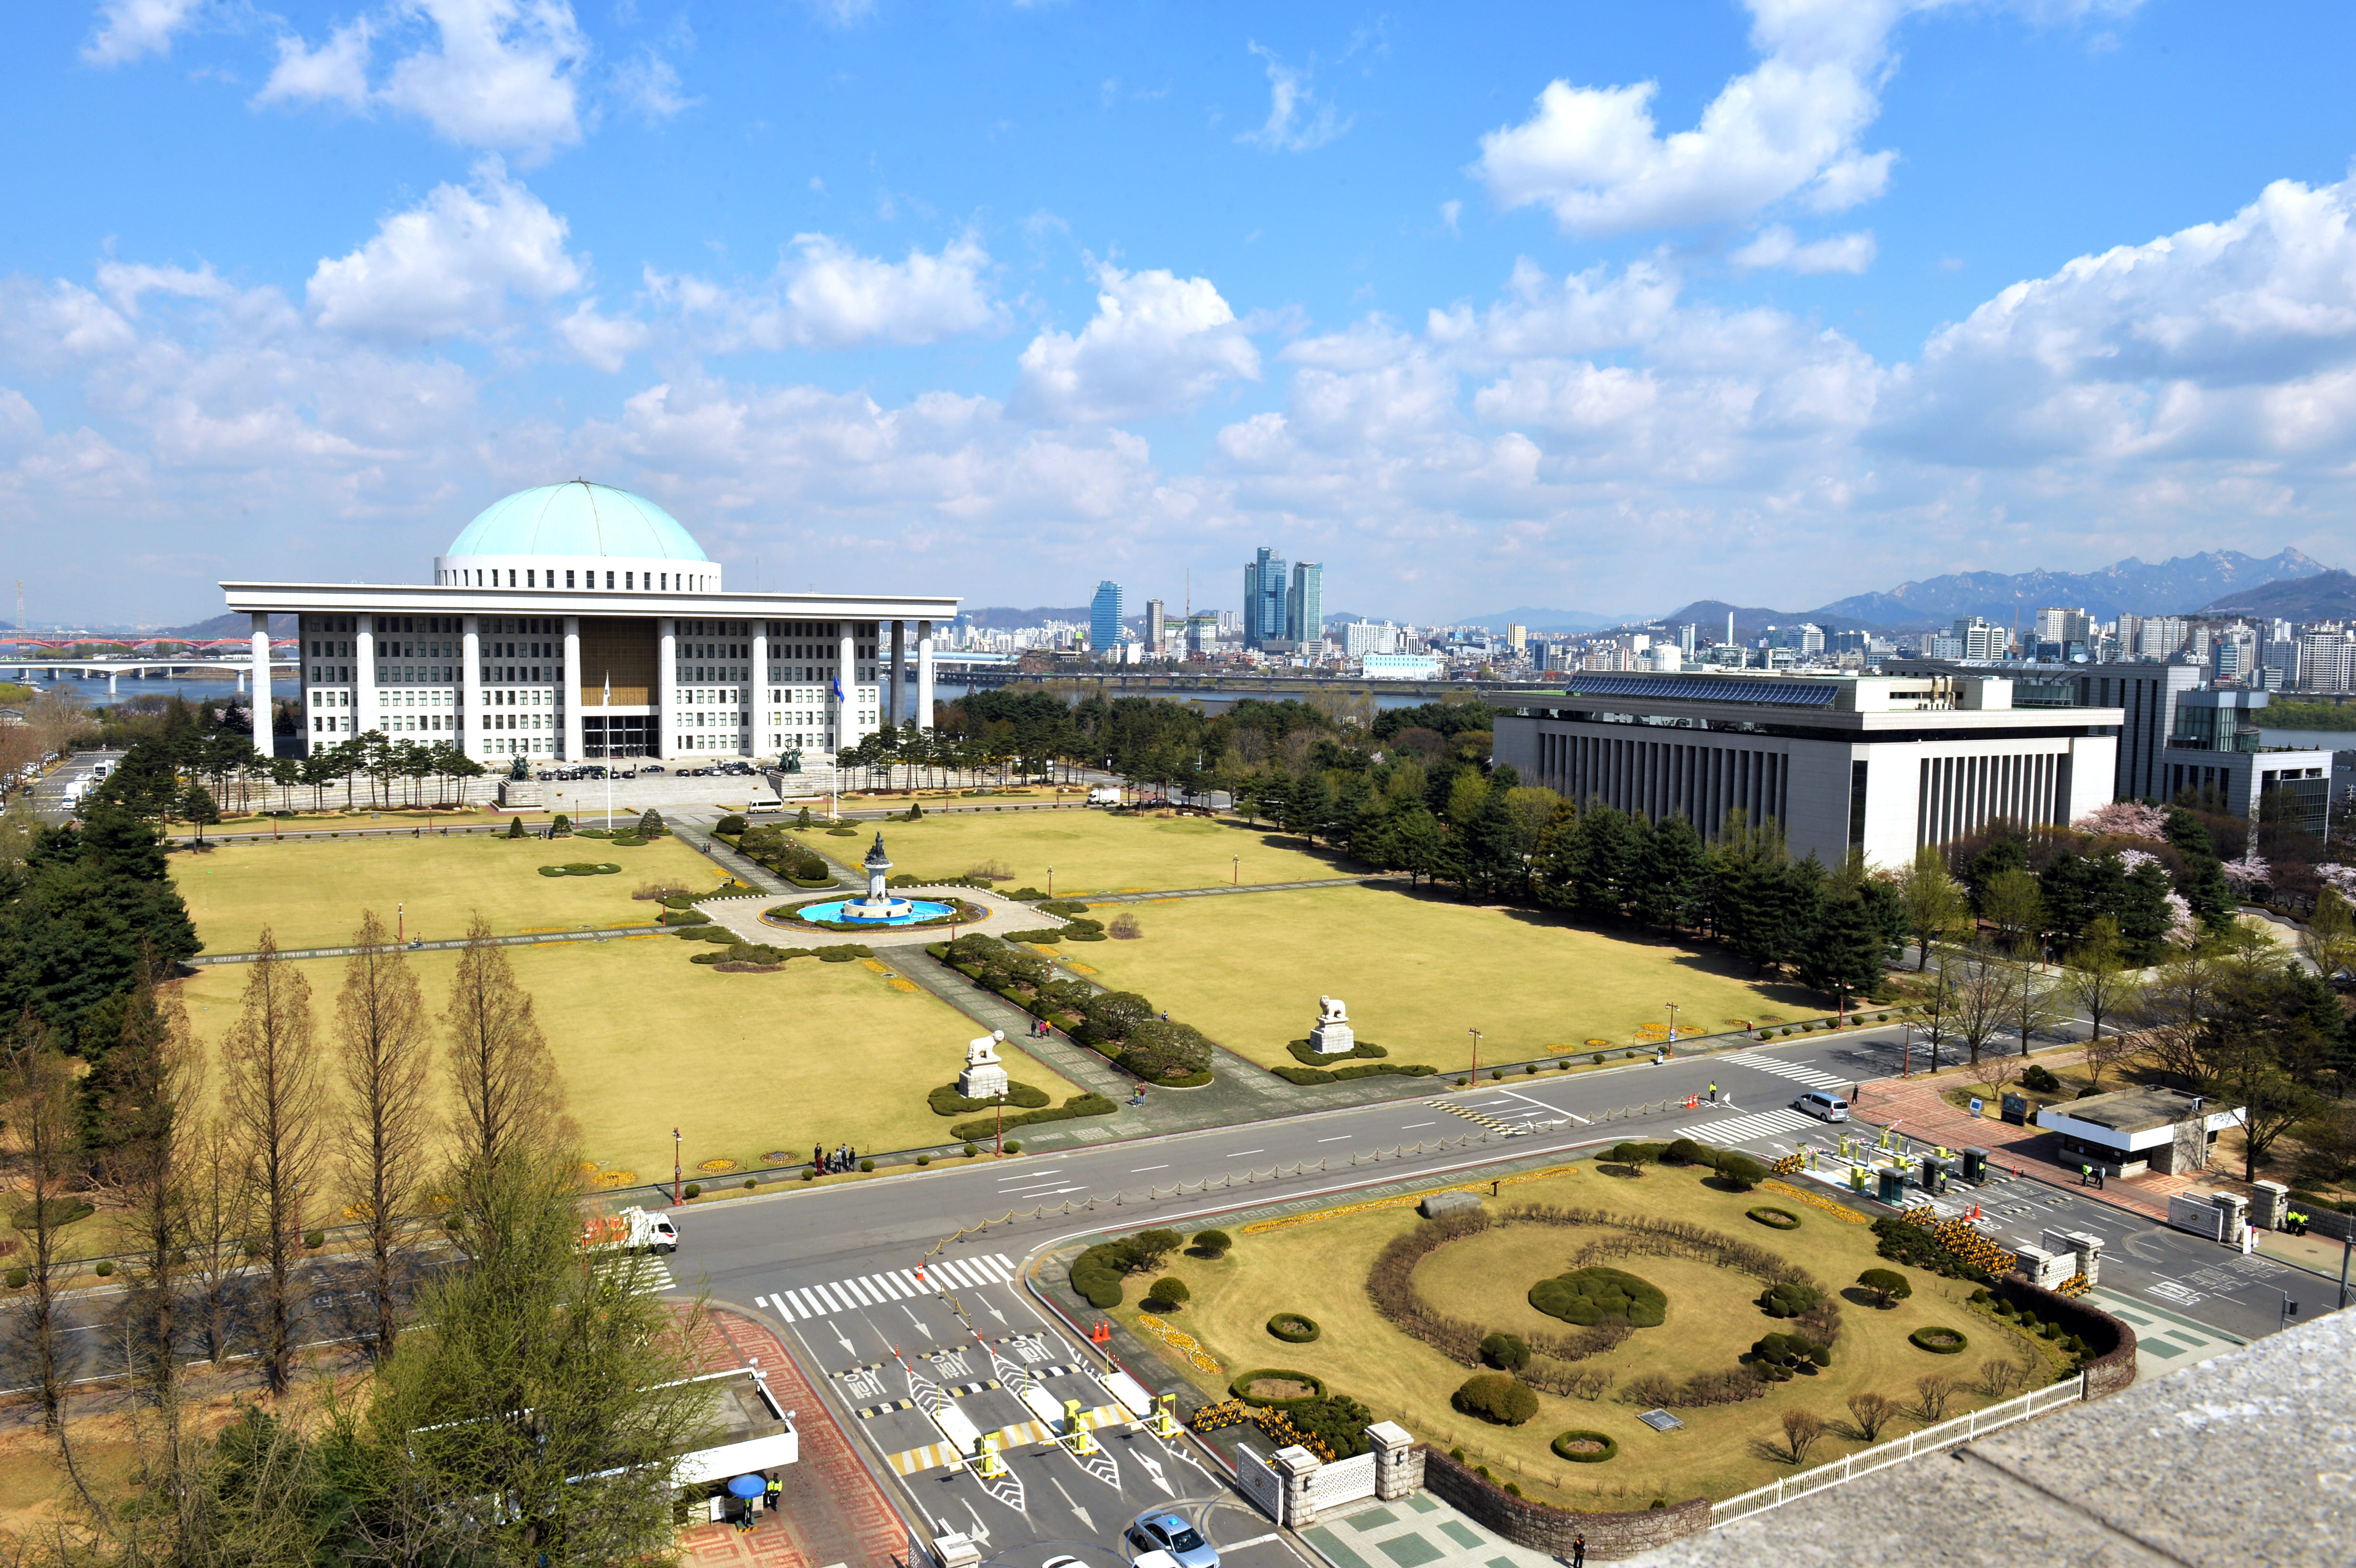 View of the National Assembly Building 관련사진 5 보기